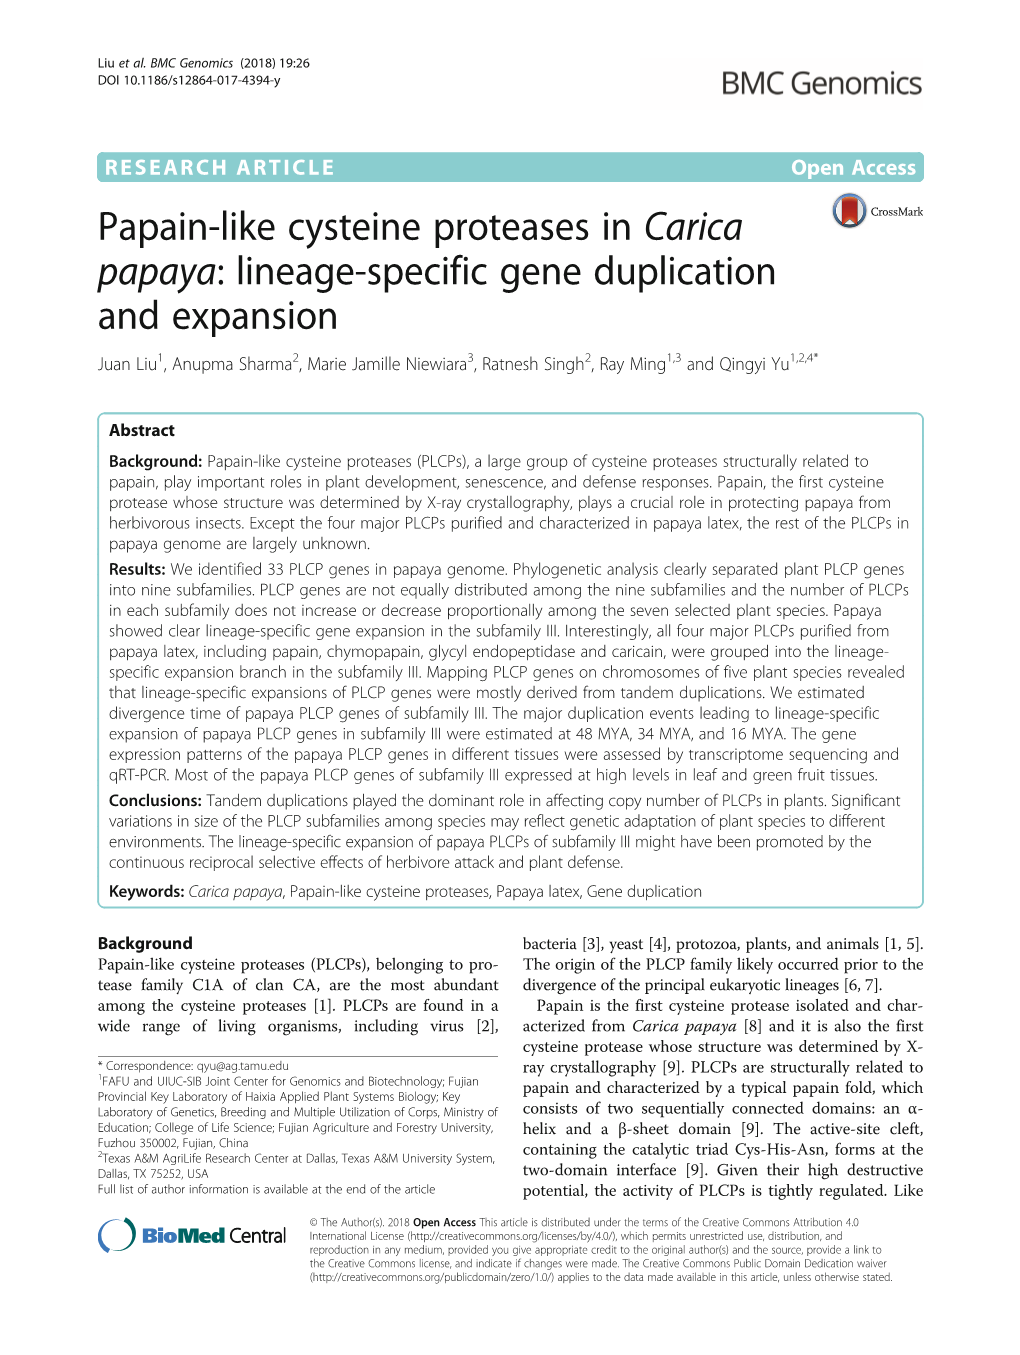 Papain-Like Cysteine Proteases in Carica Papaya: Lineage-Specific Gene Duplication and Expansion